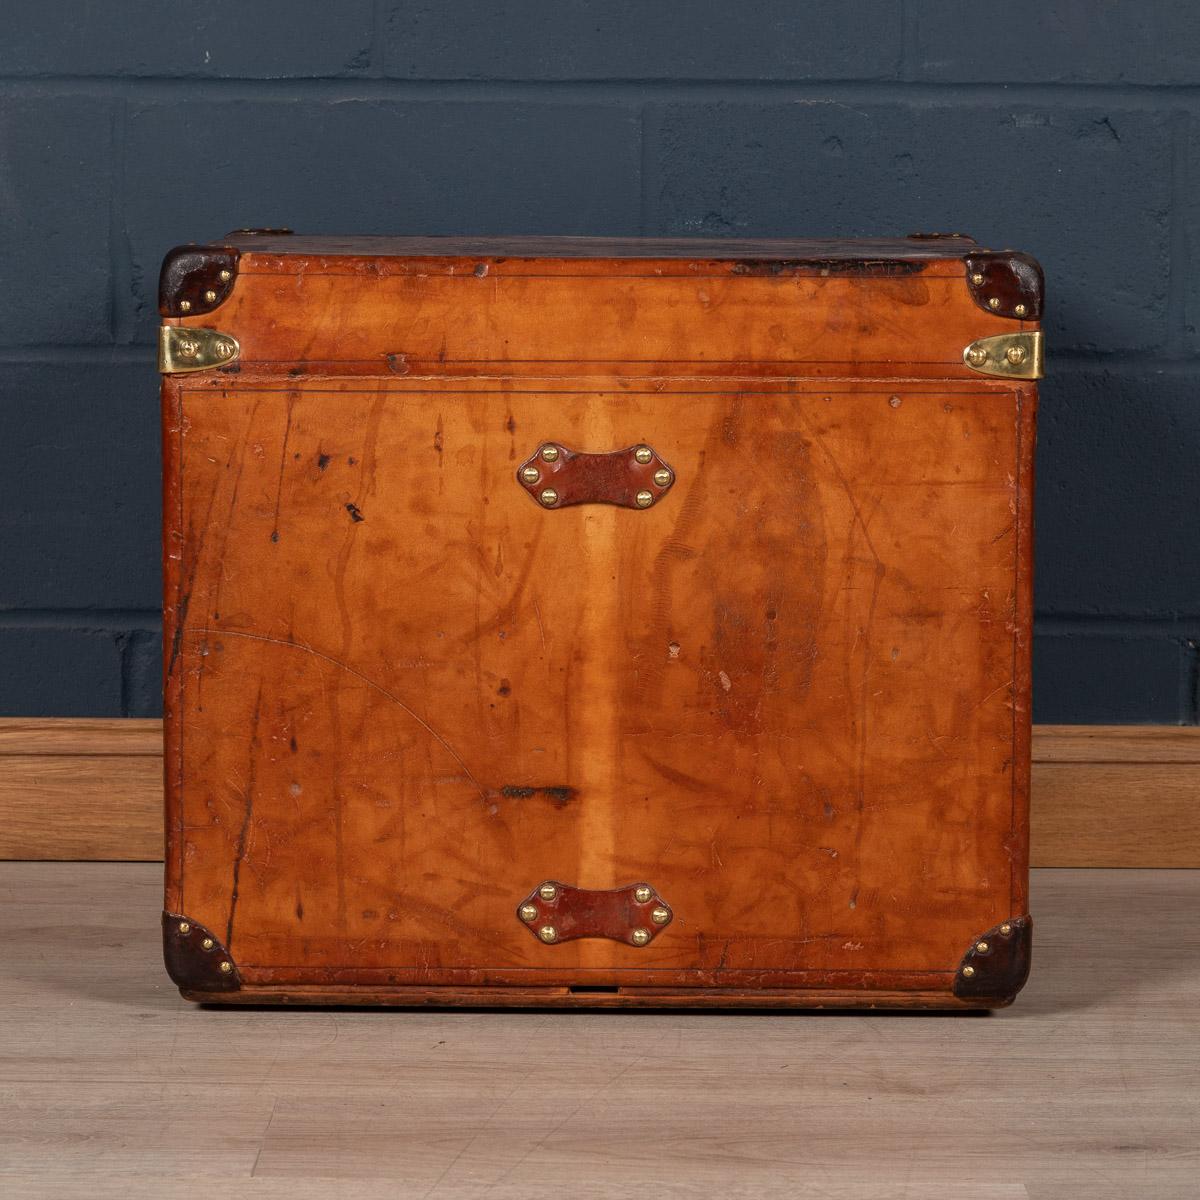 20th Century Louis Vuitton Trunk in Natural Cow Hide, Paris, c.1900 In Good Condition For Sale In Royal Tunbridge Wells, Kent